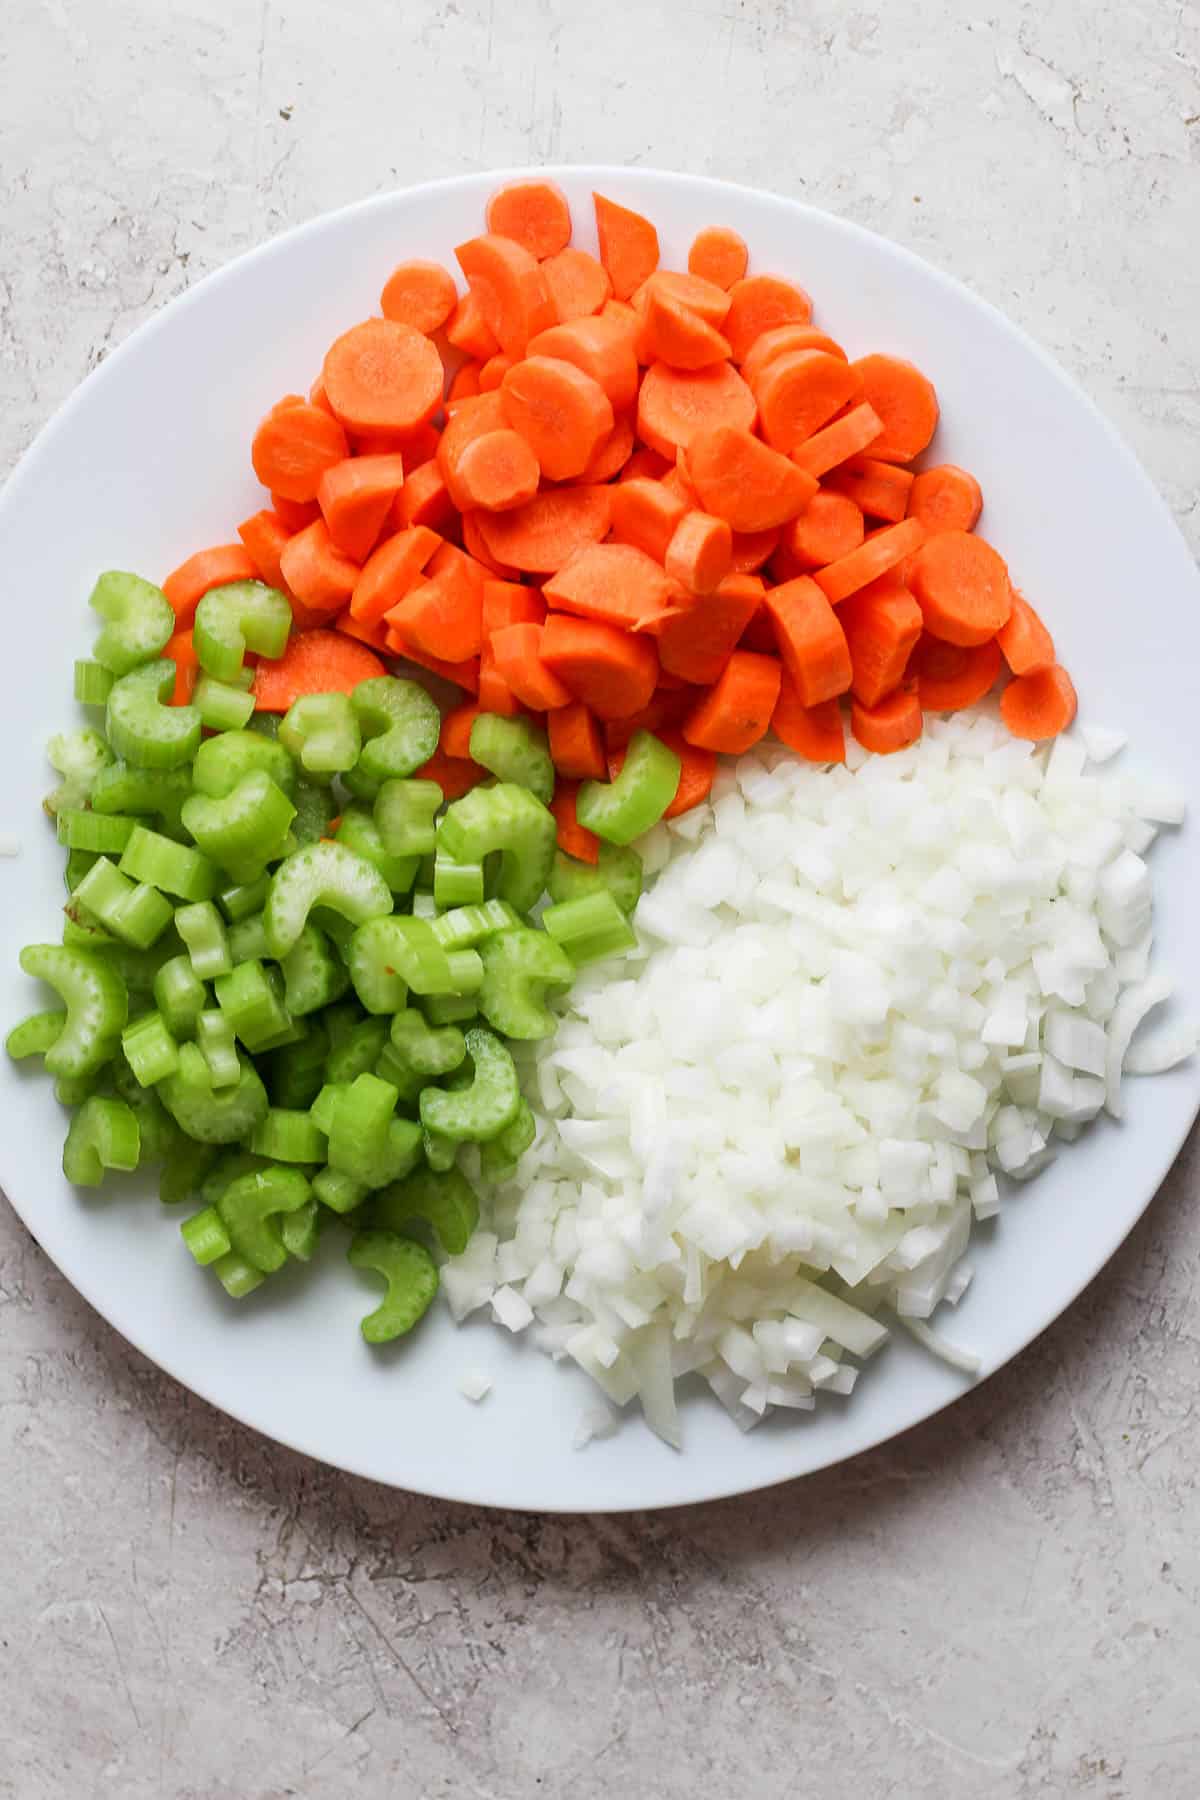 Chopped celery, carrot, and onion on a plate.